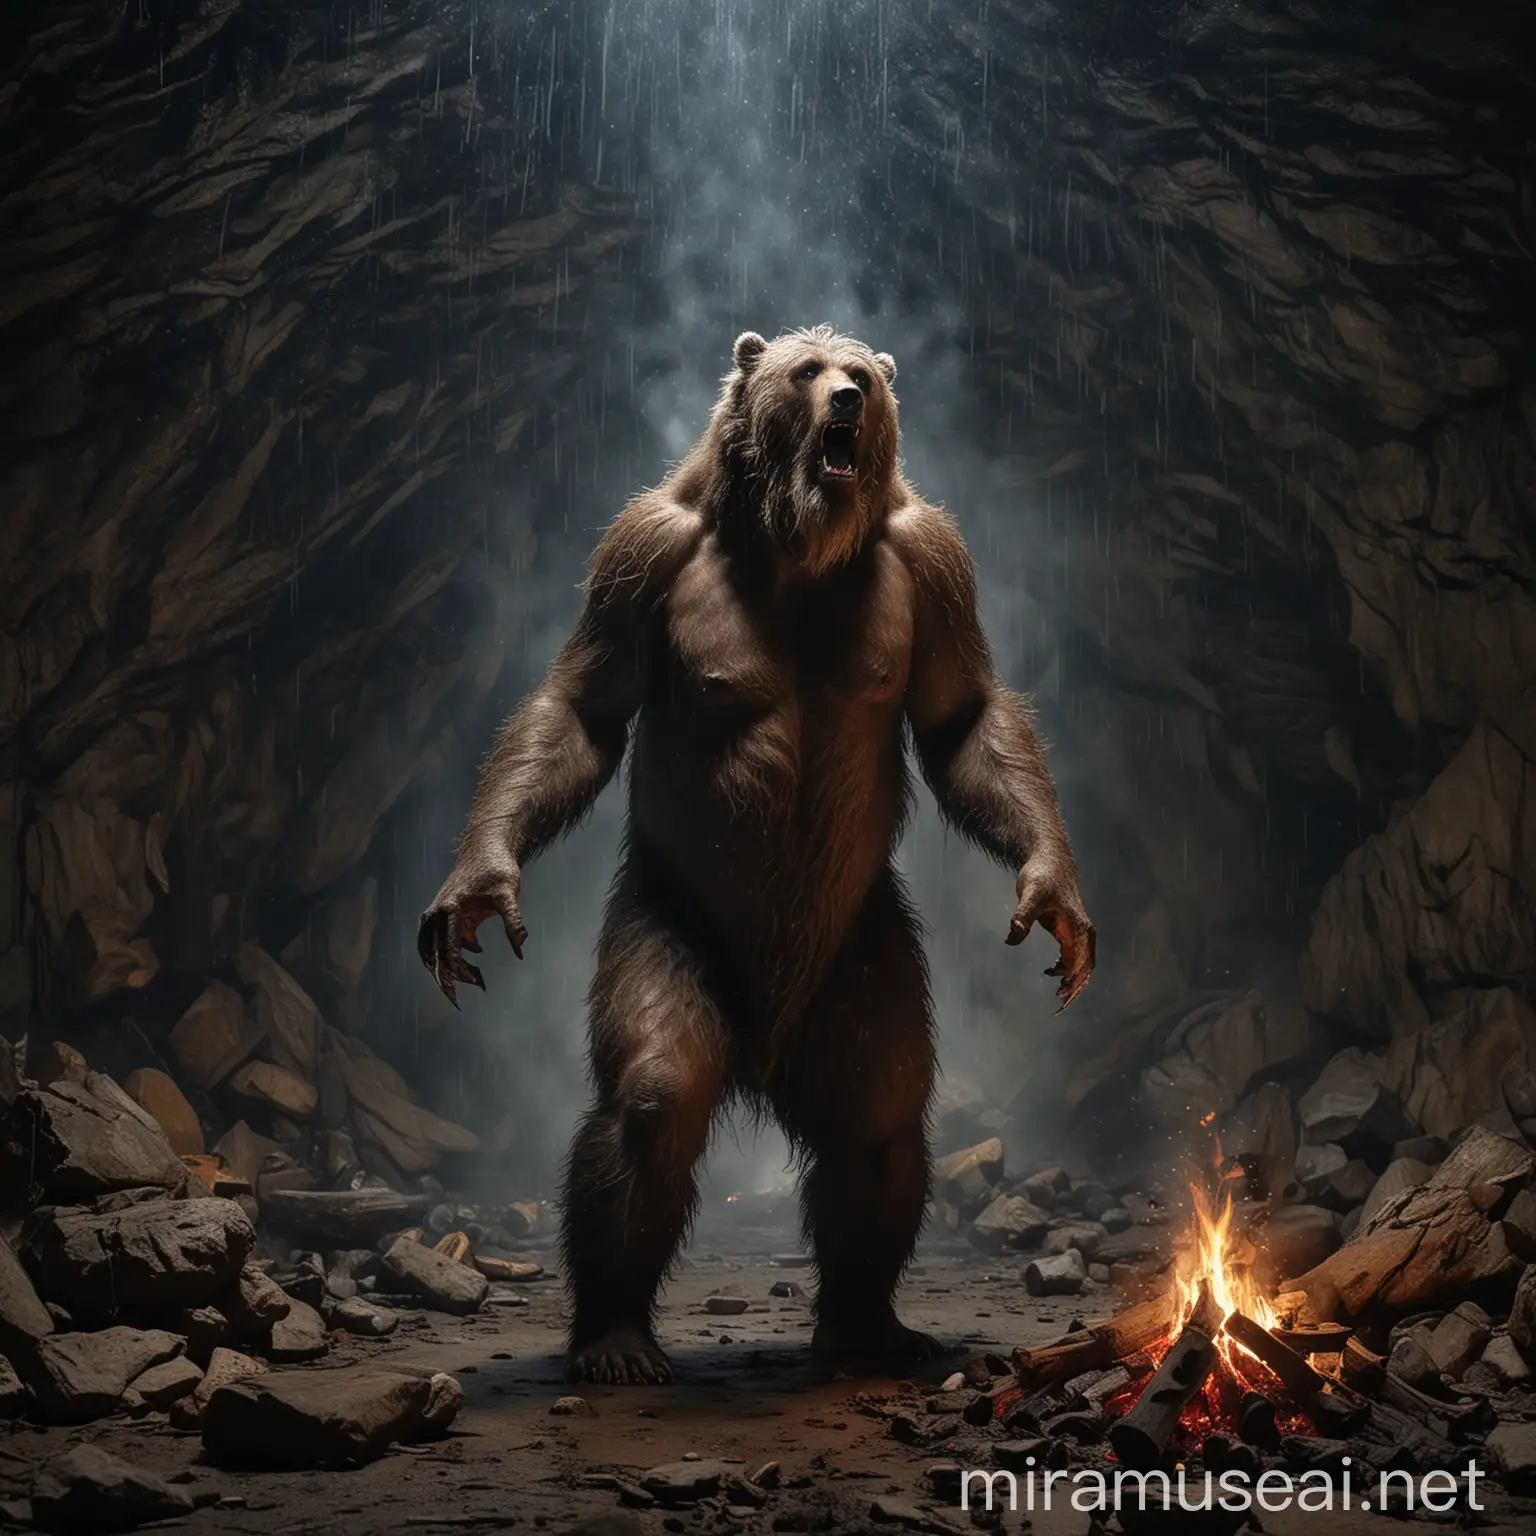 large hand and feet,black long beard,hairy,messy hair,rough skin,old age,forest cave,at midnight,bonfire,rainy,human transform into a grizzly,roar to the sky,werebear